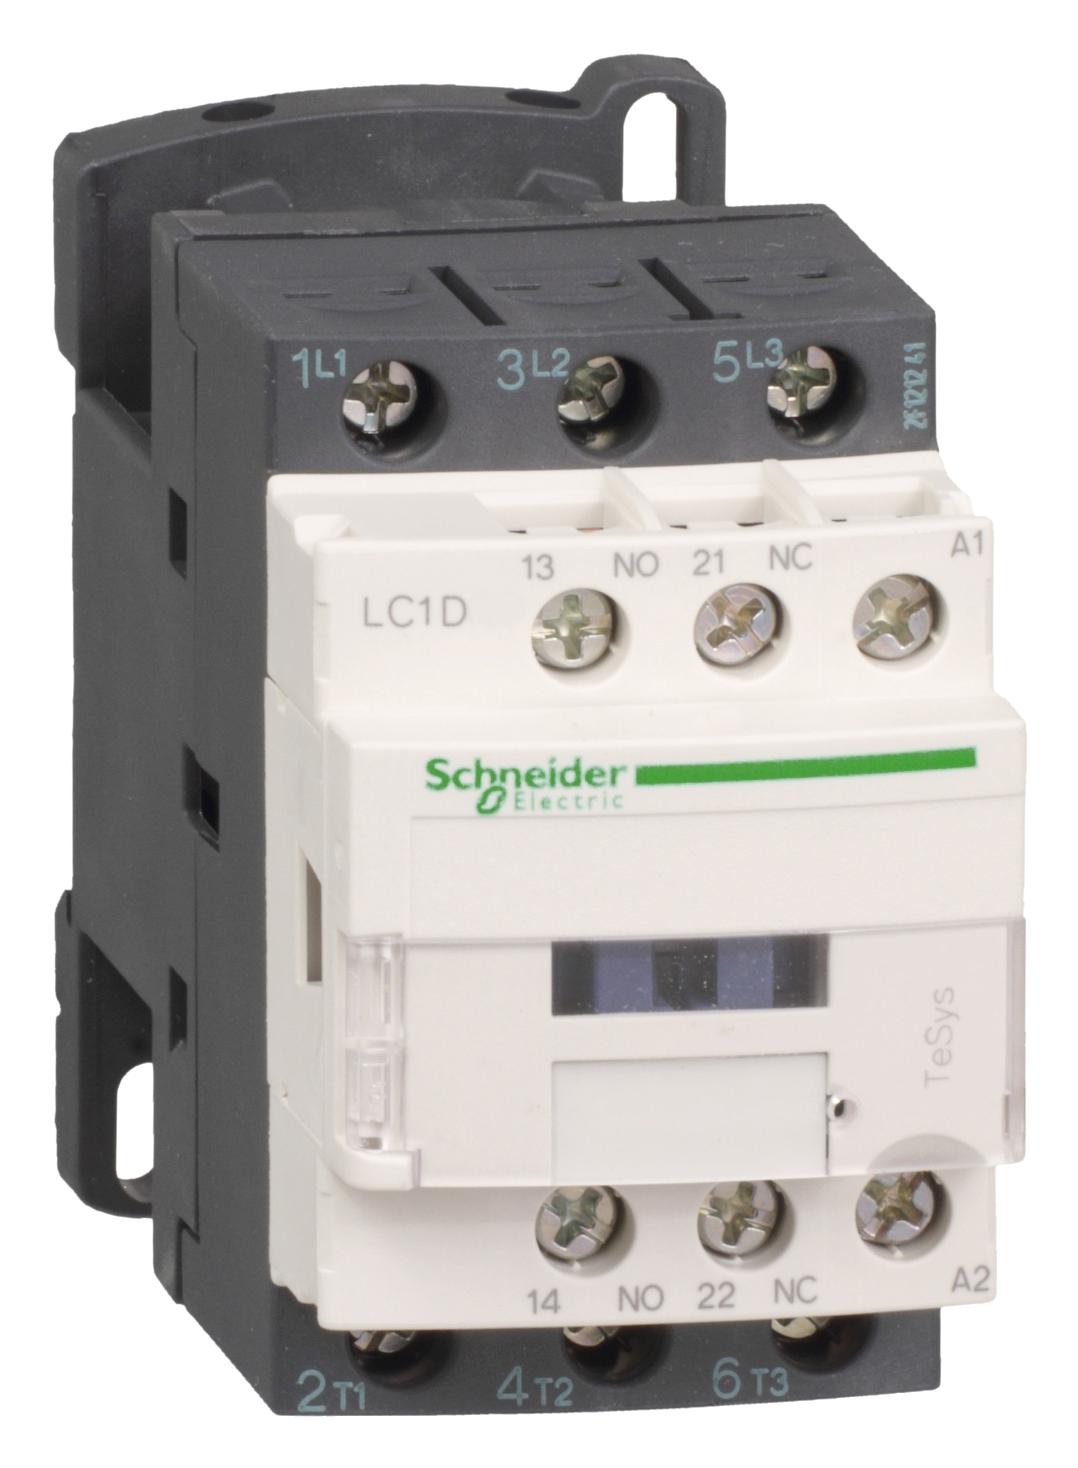 LC1D096B7 TESYS CONTACTOR SCHNEIDER ELECTRIC